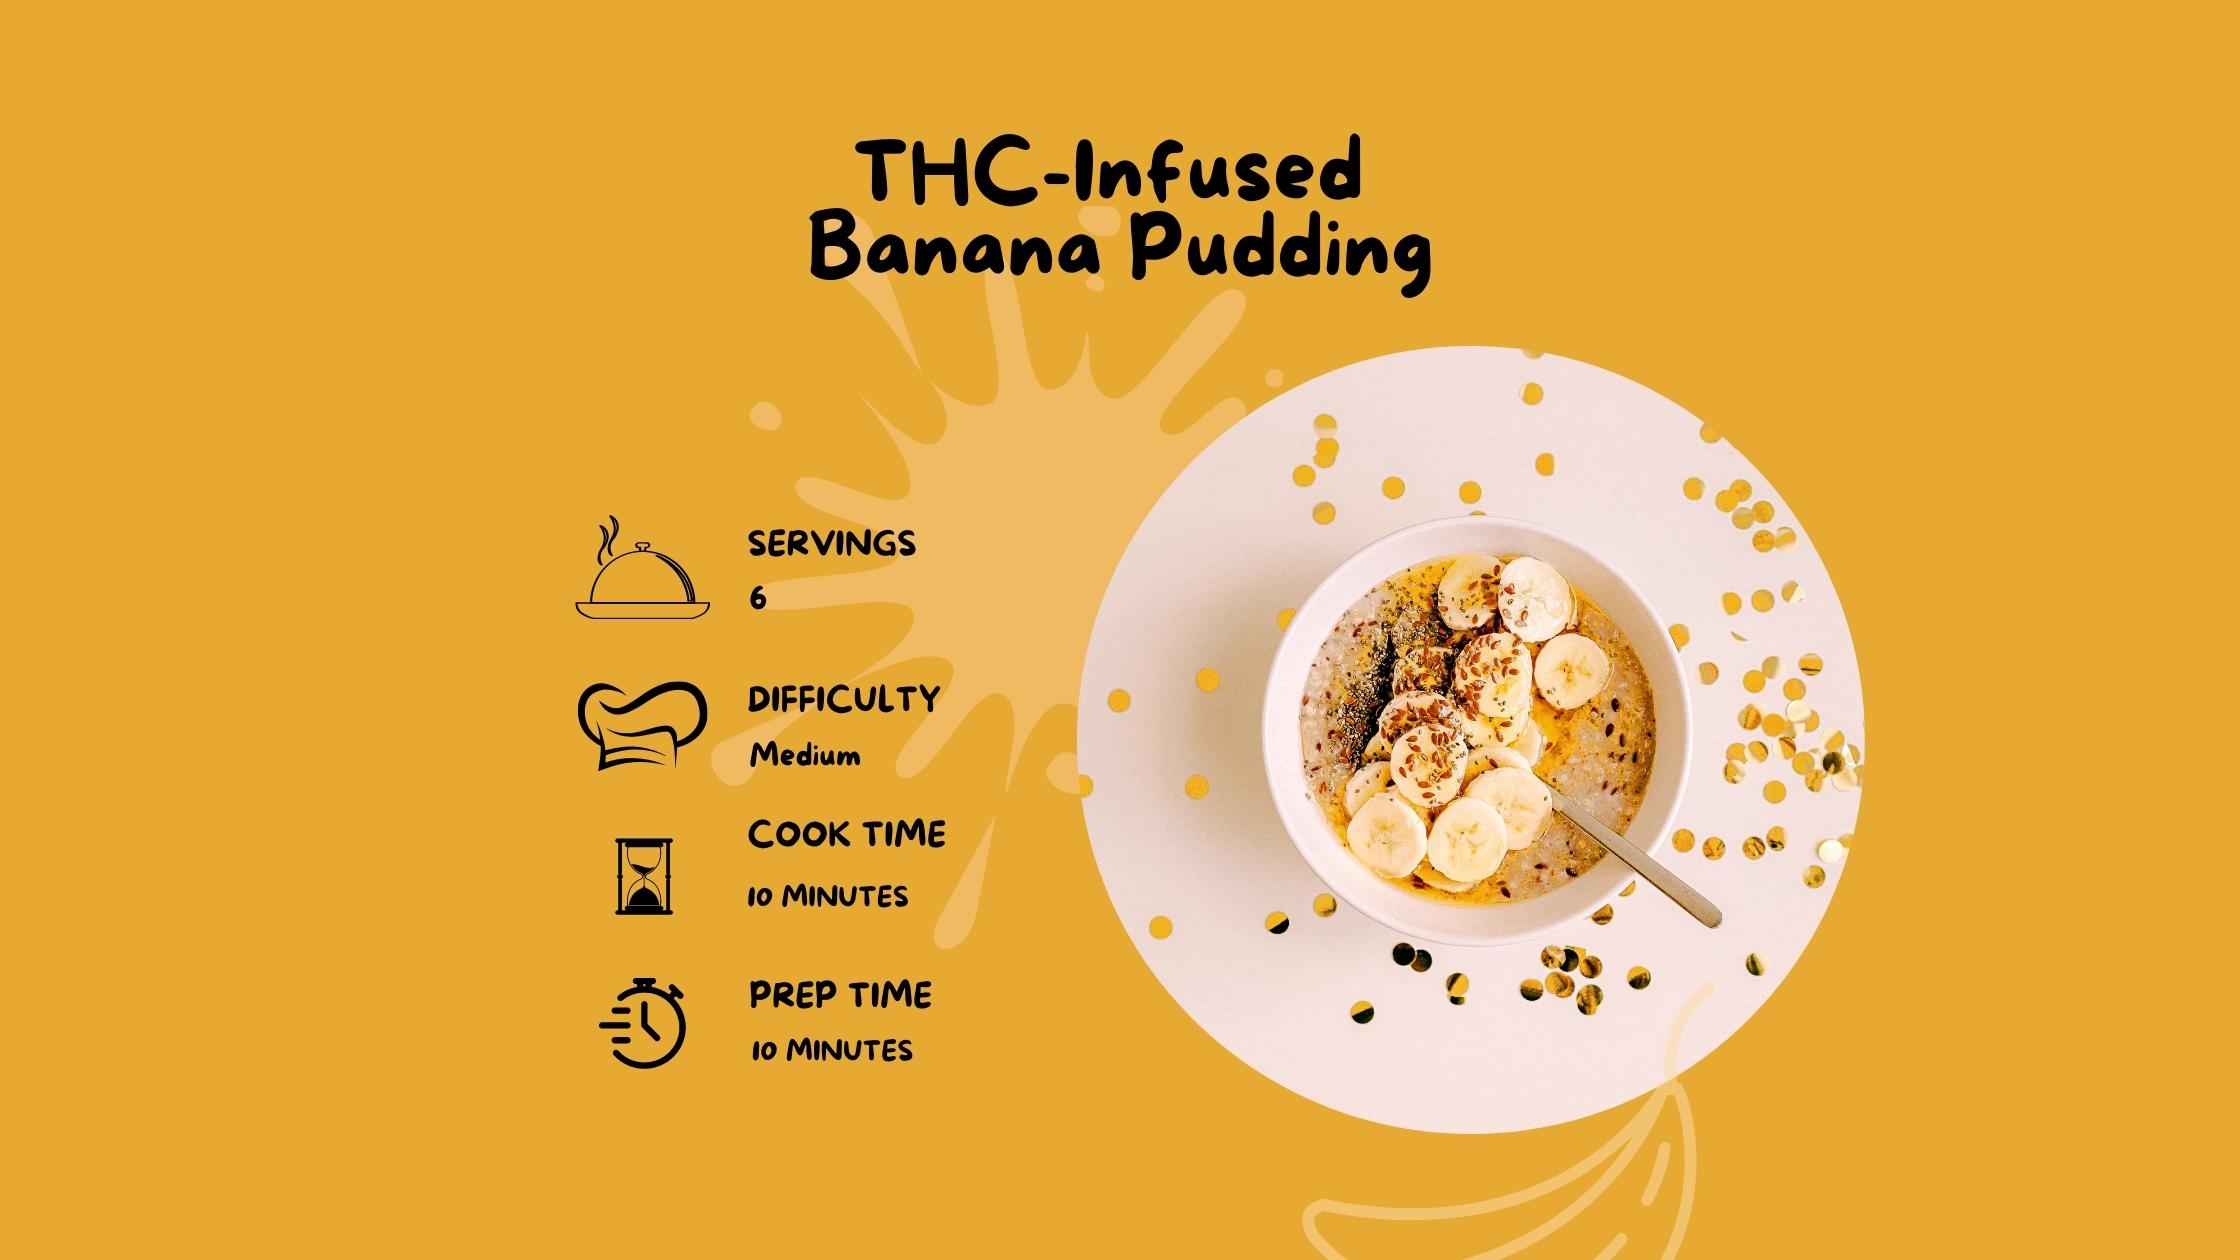 Infused Banana Pudding (2240 × 1260 px)